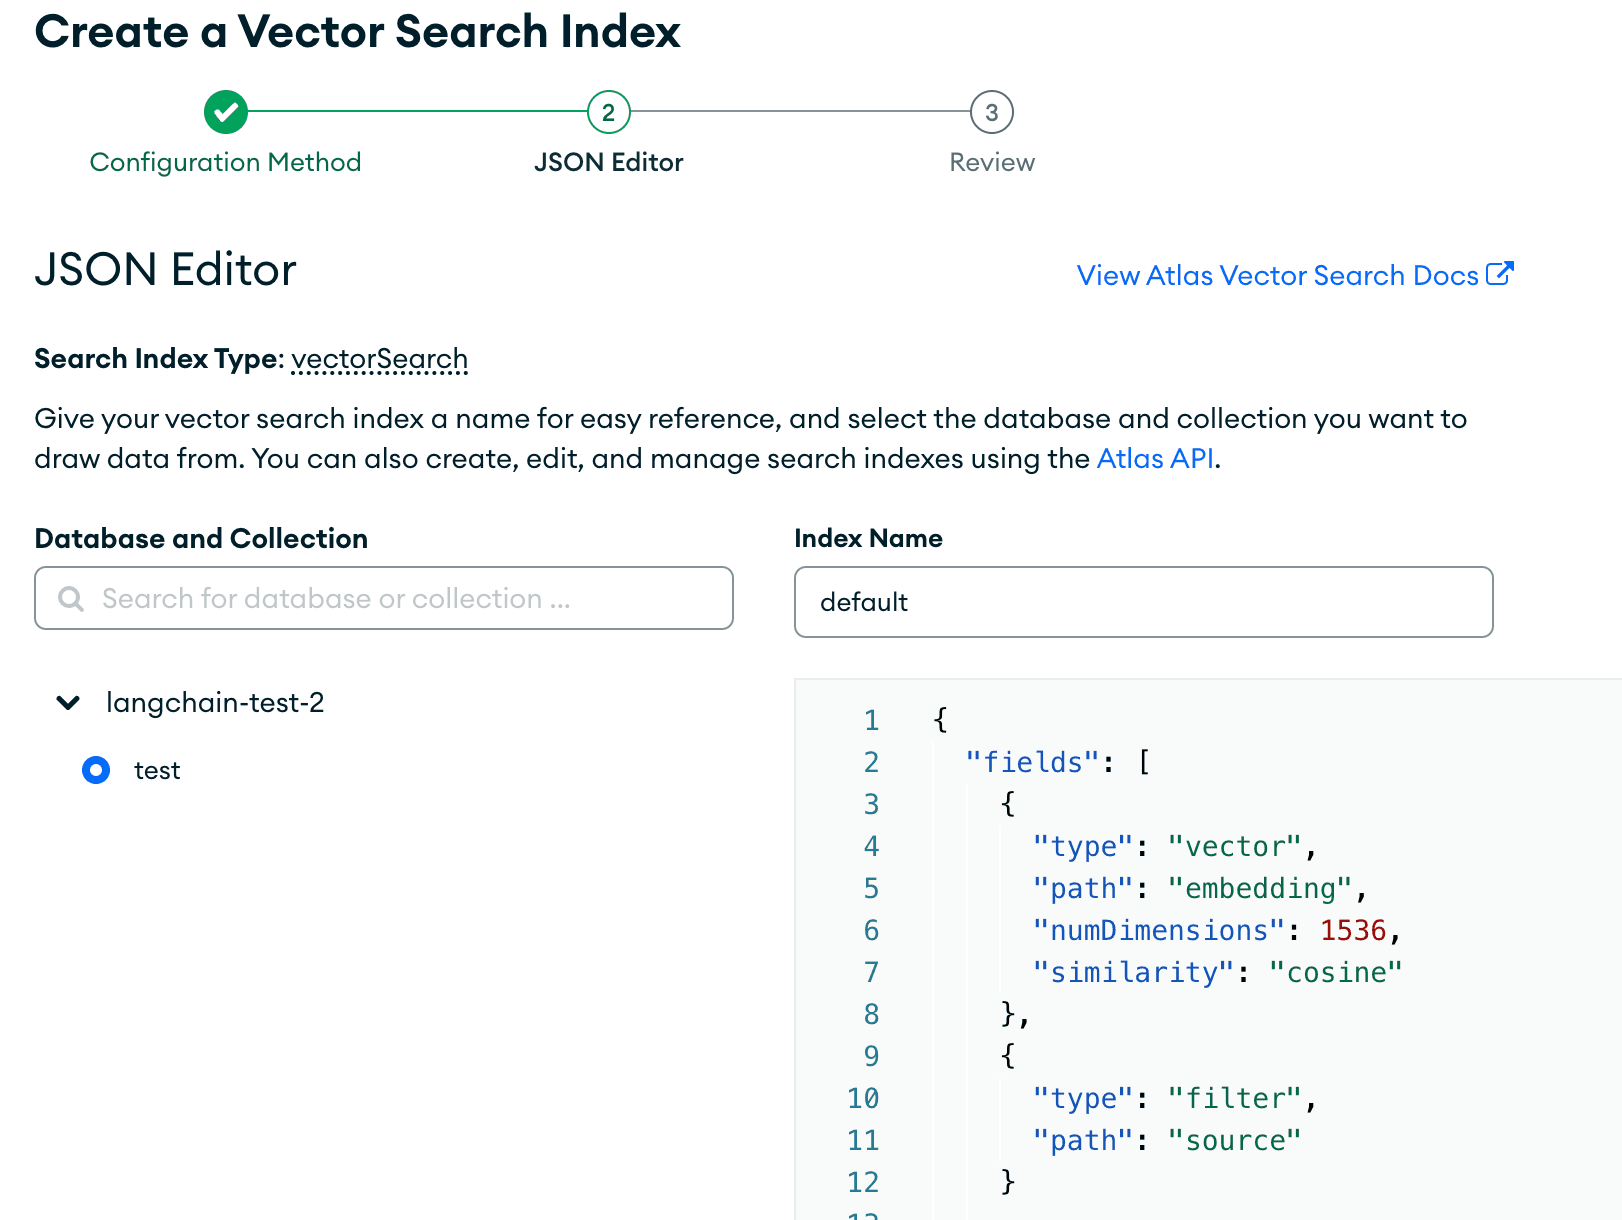 proper configuration of our vector search index